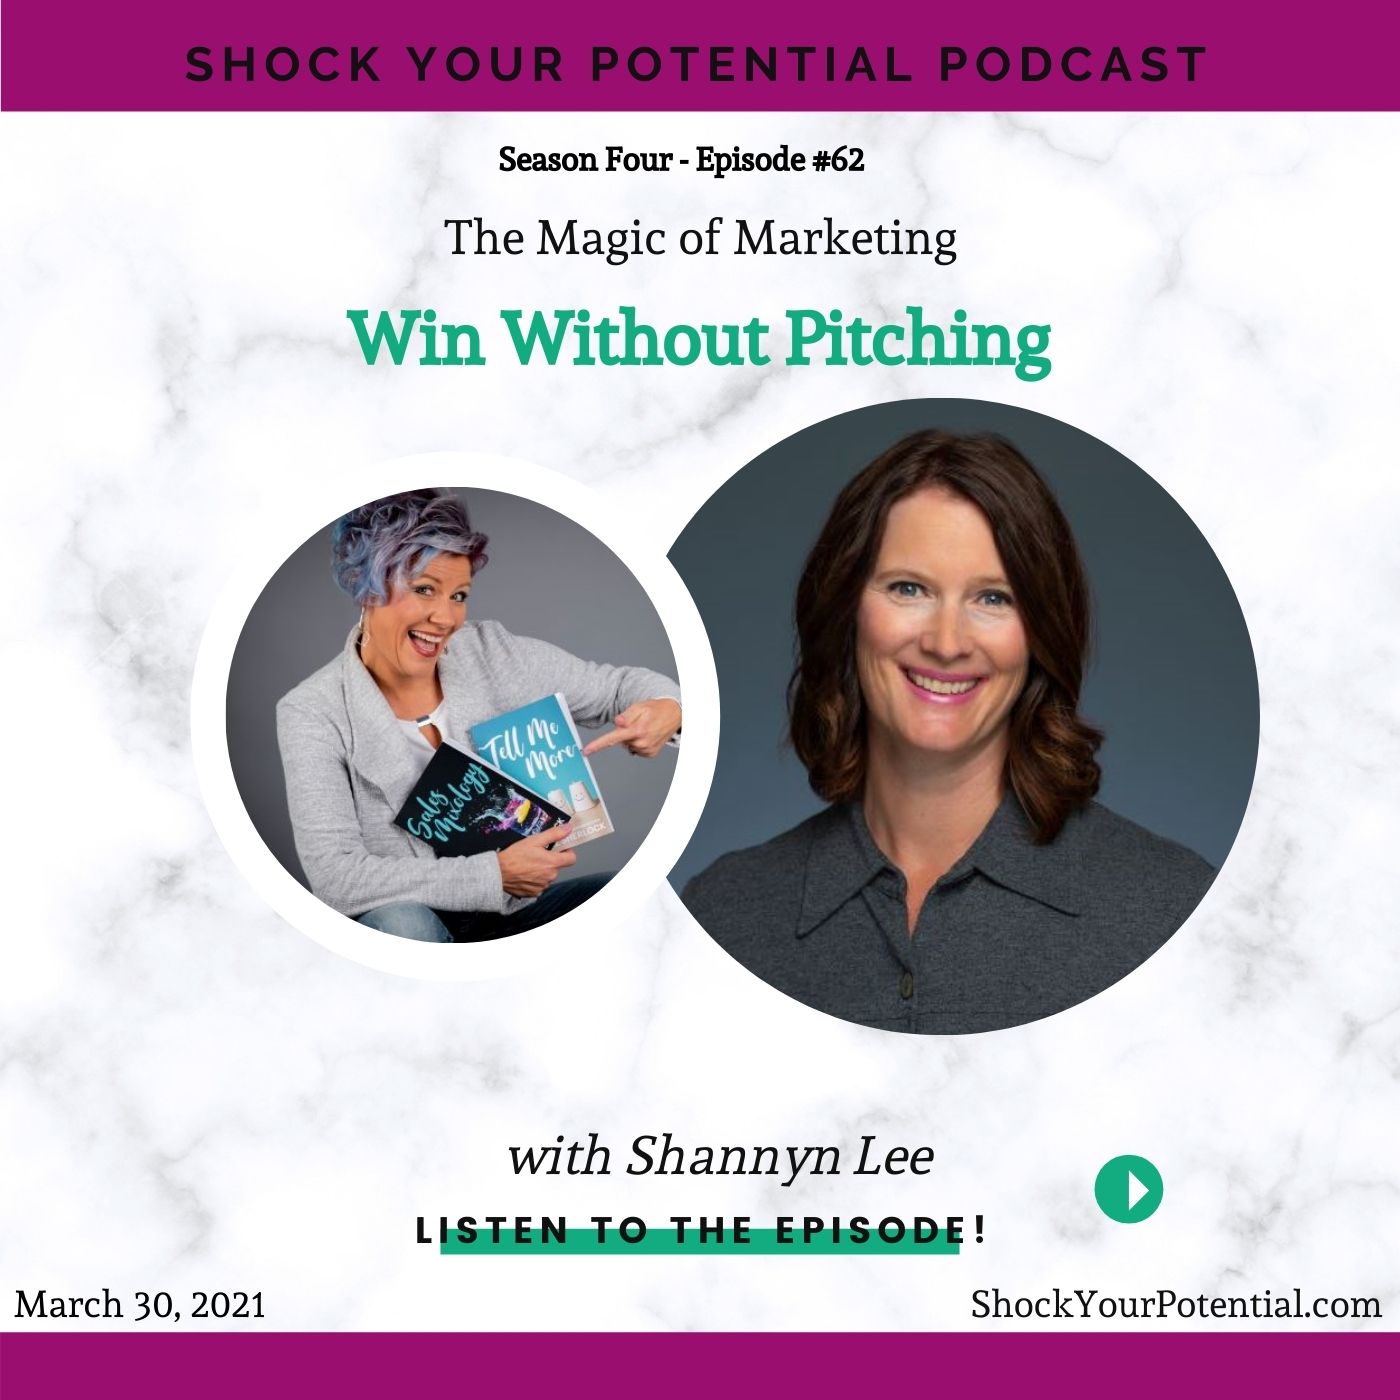 Win Without Pitching – Shannyn Lee